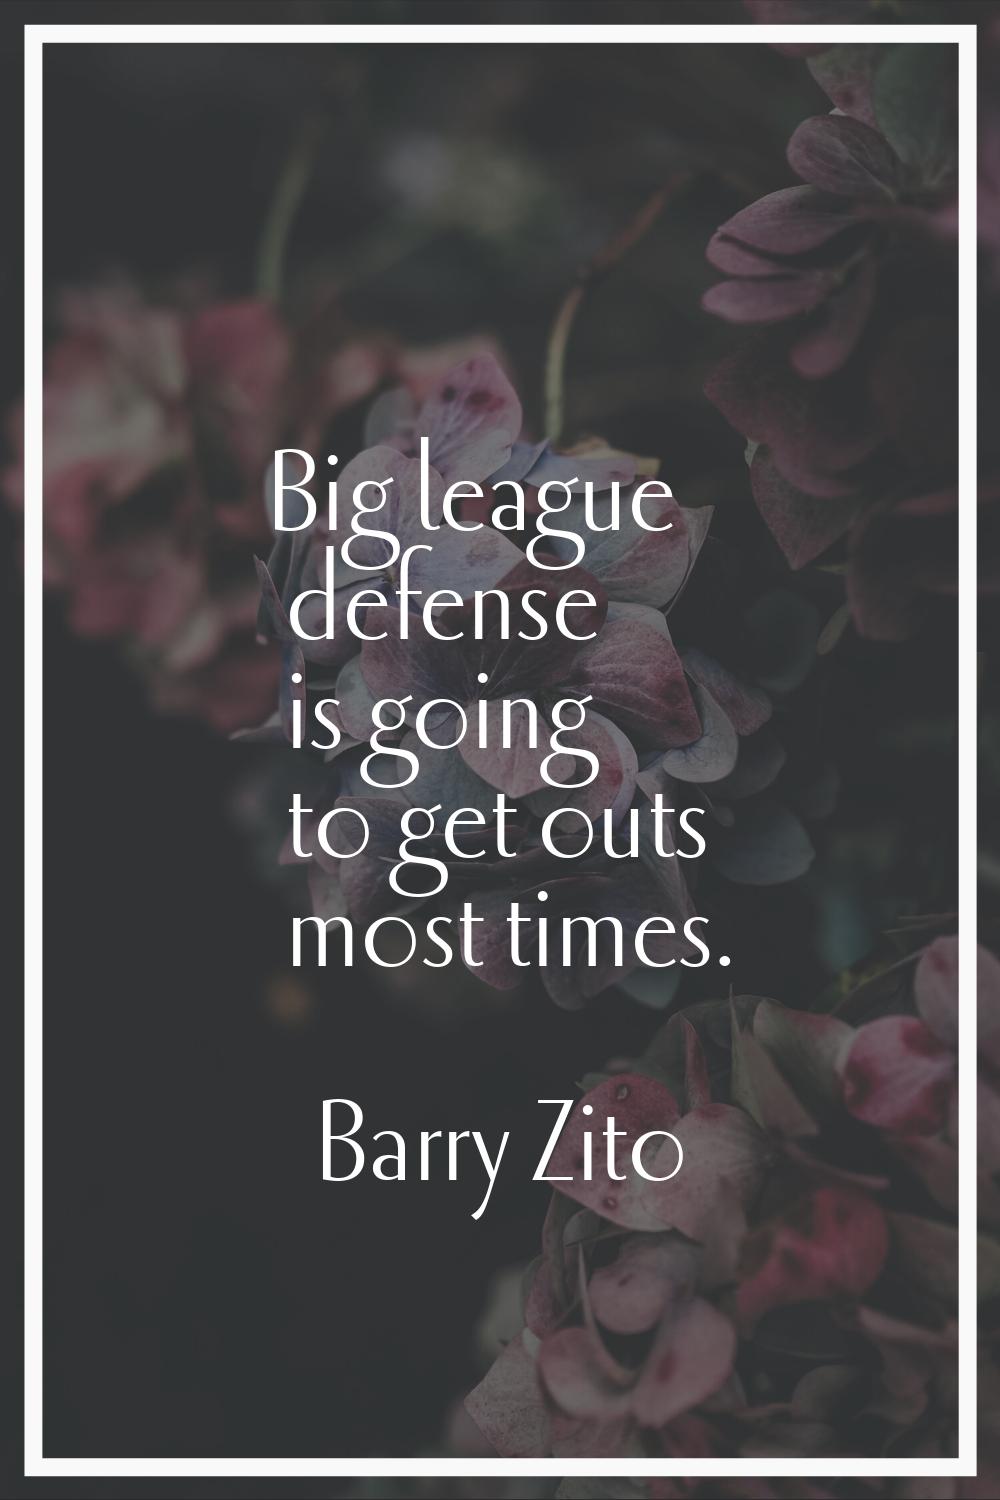 Big league defense is going to get outs most times.